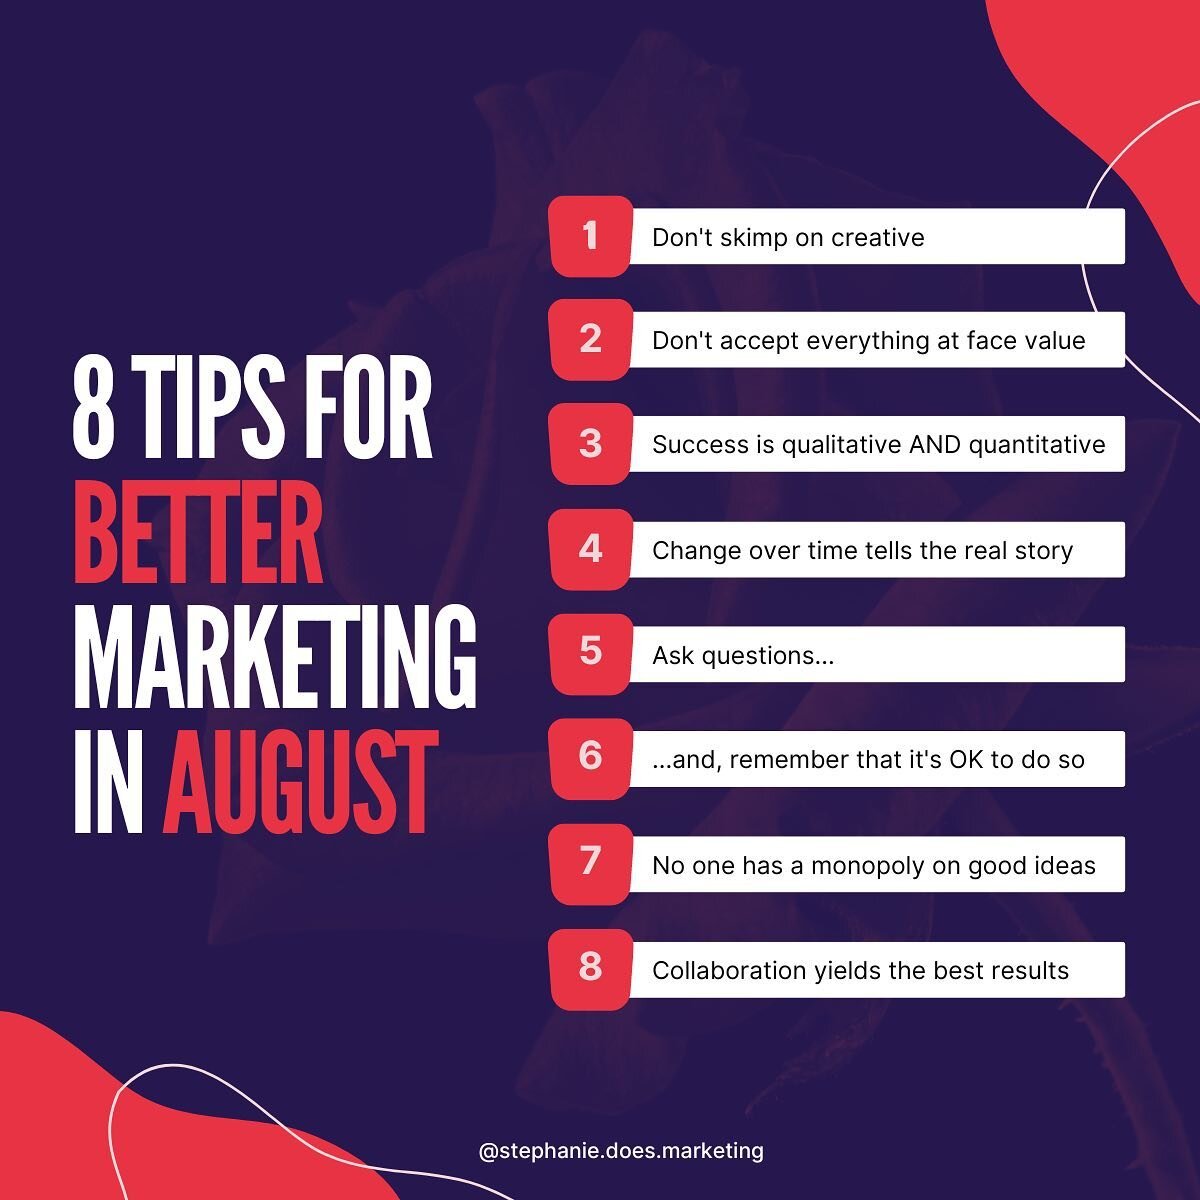 Can you believe it's already August? ☀ Save these 8 simple reminders to do better marketing this month:

1. Don't skimp on creative 
2. Don't accept everything at face value
3. Use qualitative AND quantitative measures of success
4. Look at change ov